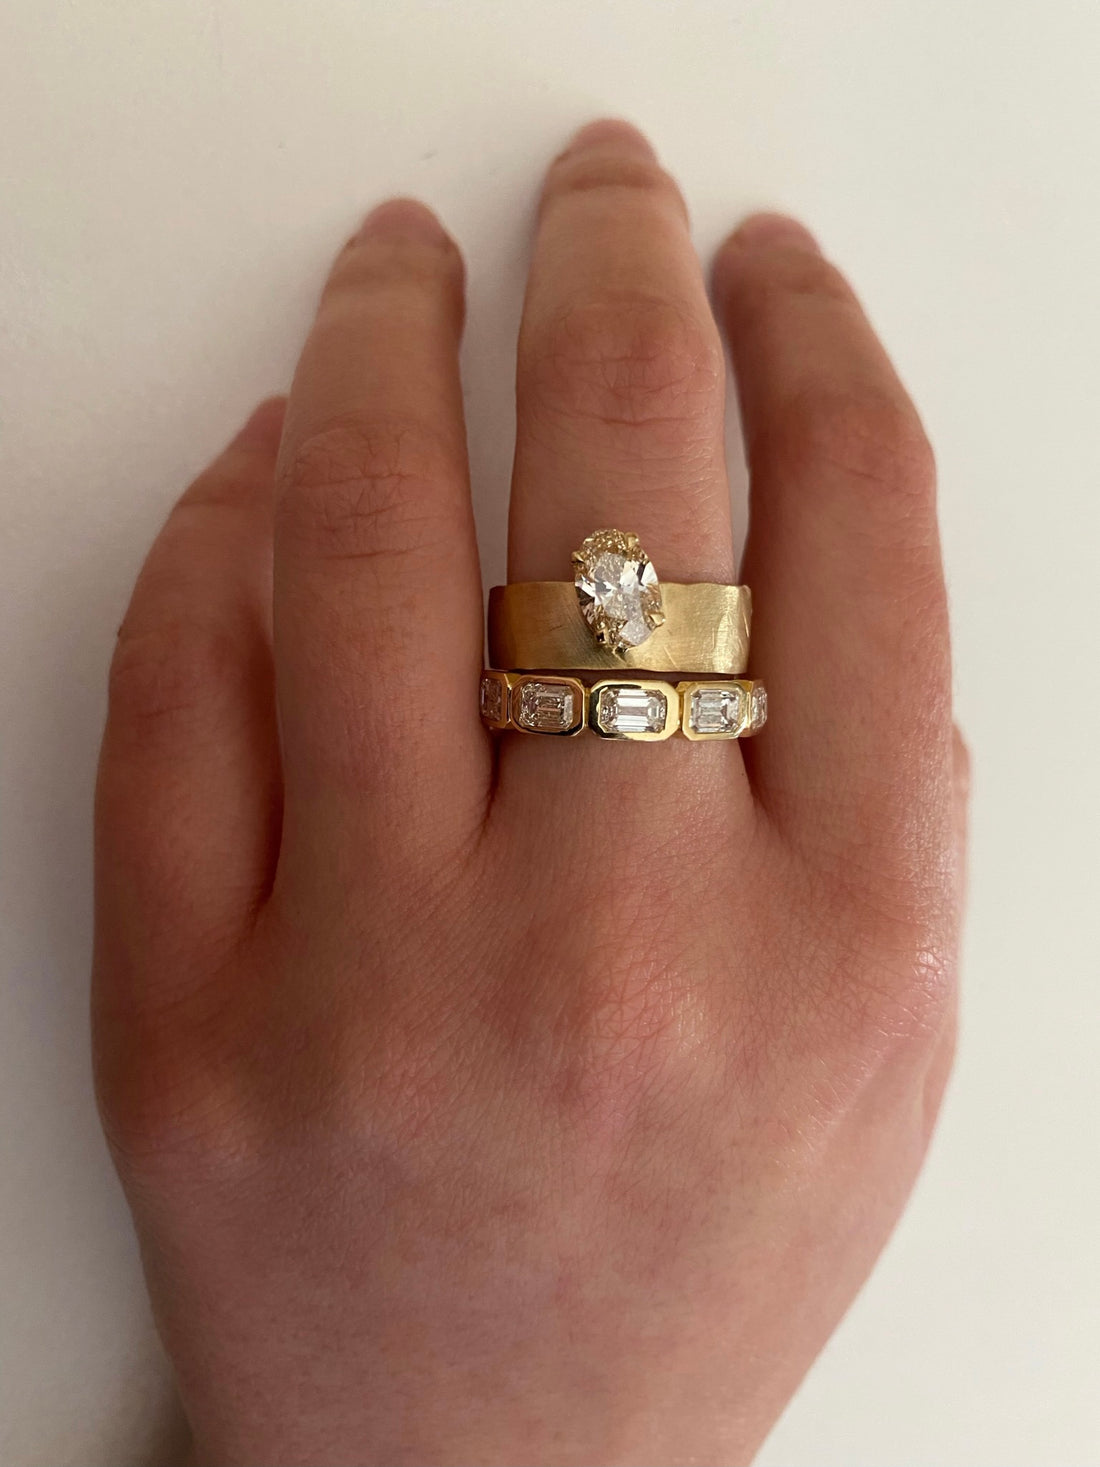 ONE YEAR REVIEW AND WEAR AND TEAR OF THE CARTIER LOVE RING!  is